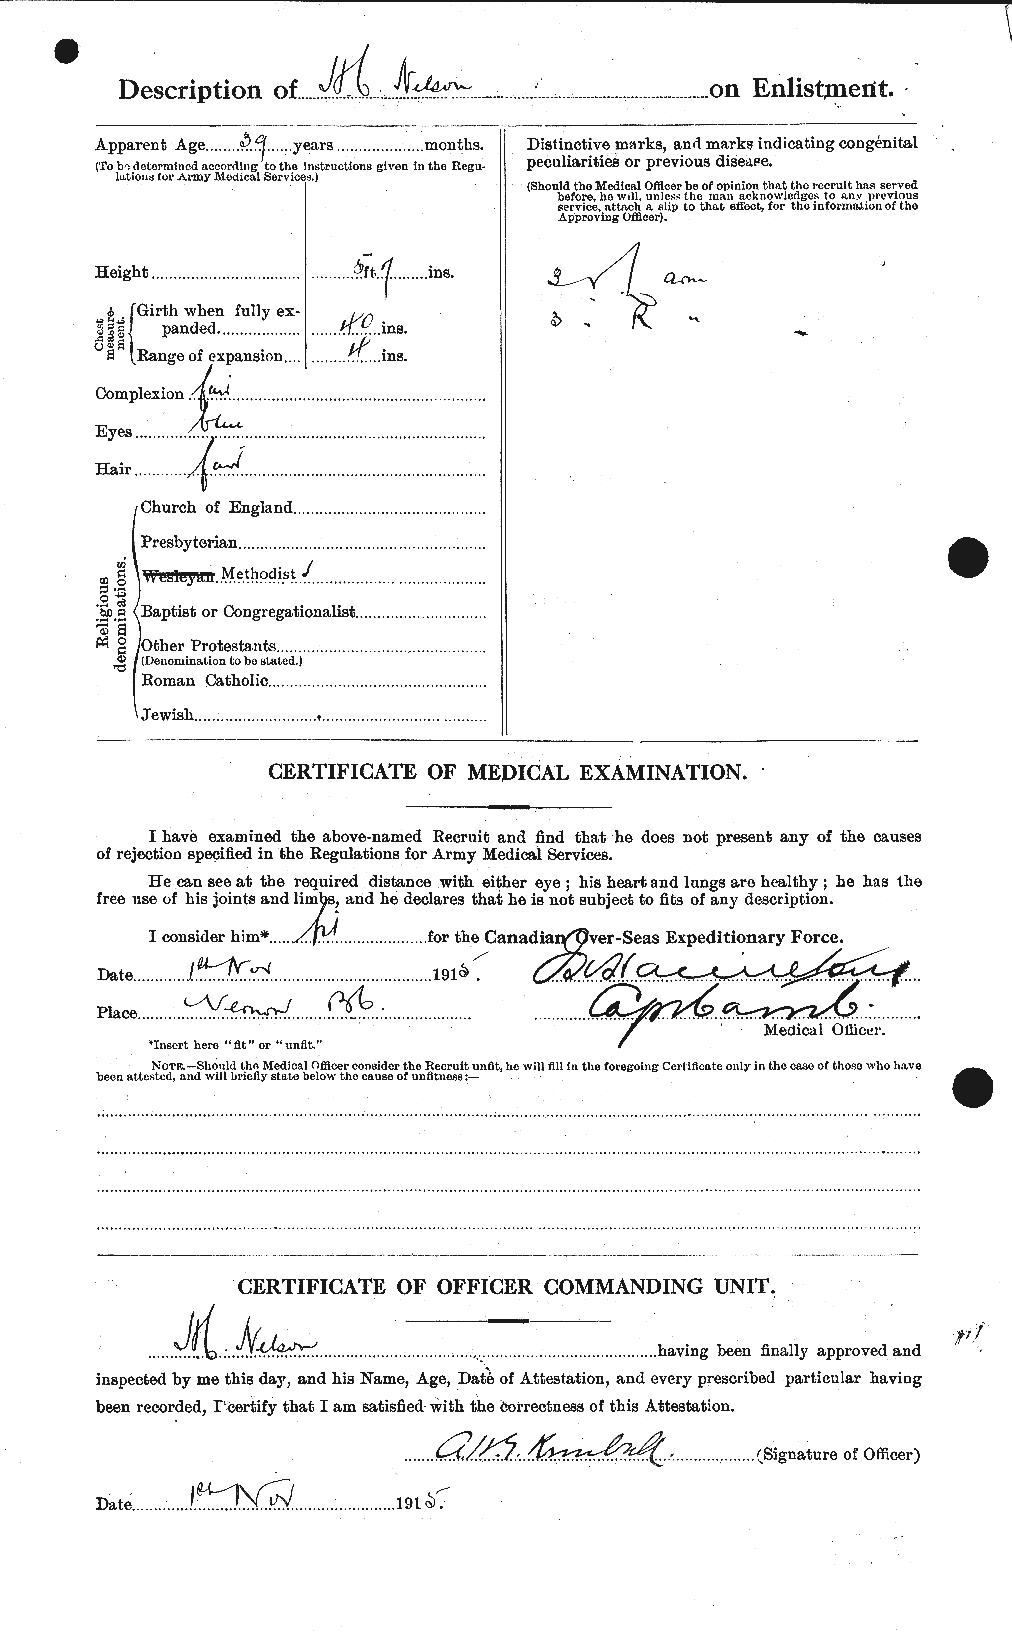 Personnel Records of the First World War - CEF 543828b